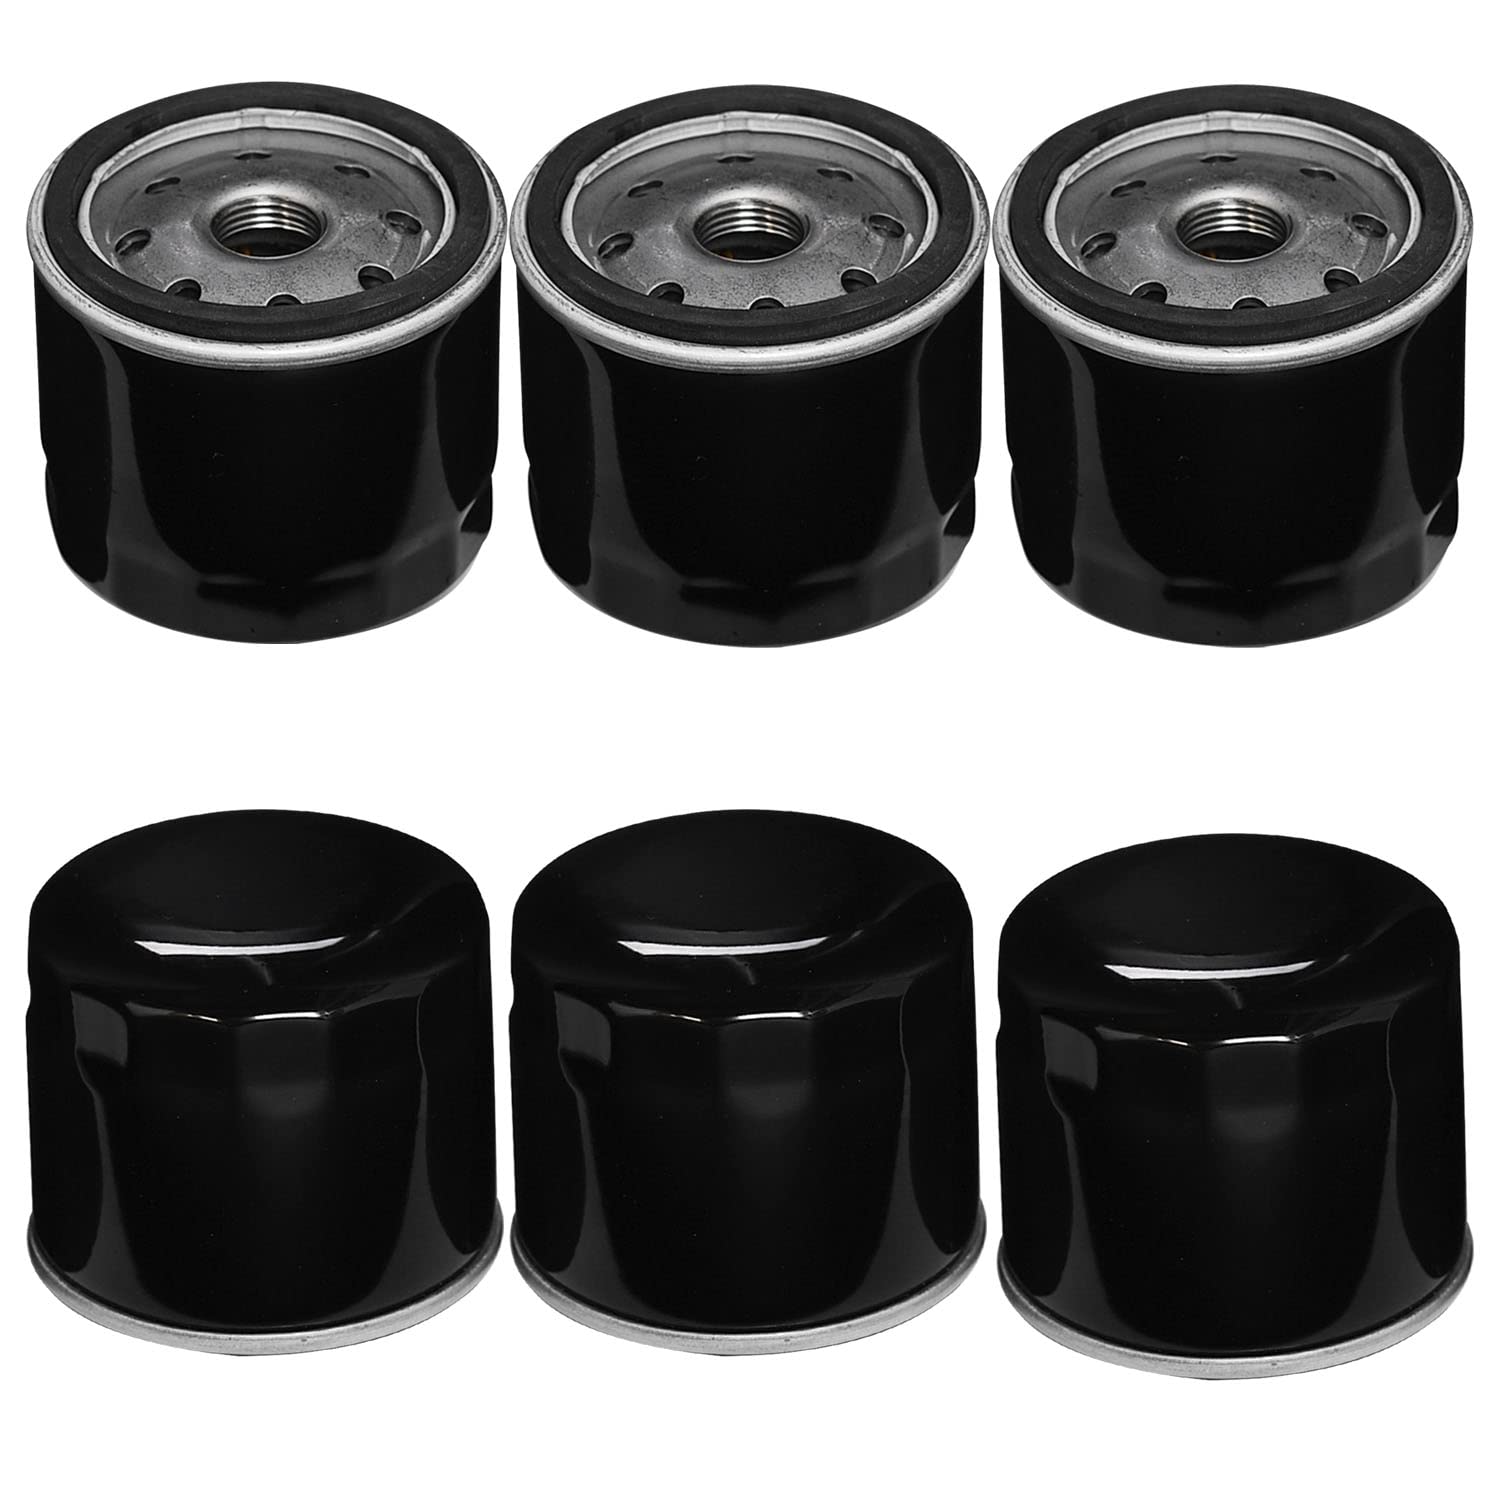 HIFROM (Pack of 6)12 050 01-S Oil Filter Compatible with Kohler CH18 CH20 CH22 CH25 CV18 CV22 CV23 CV25 KT715 KT725 KT730 KT735 Toro 74610 74603 Lawn Mower Engine von hifrom